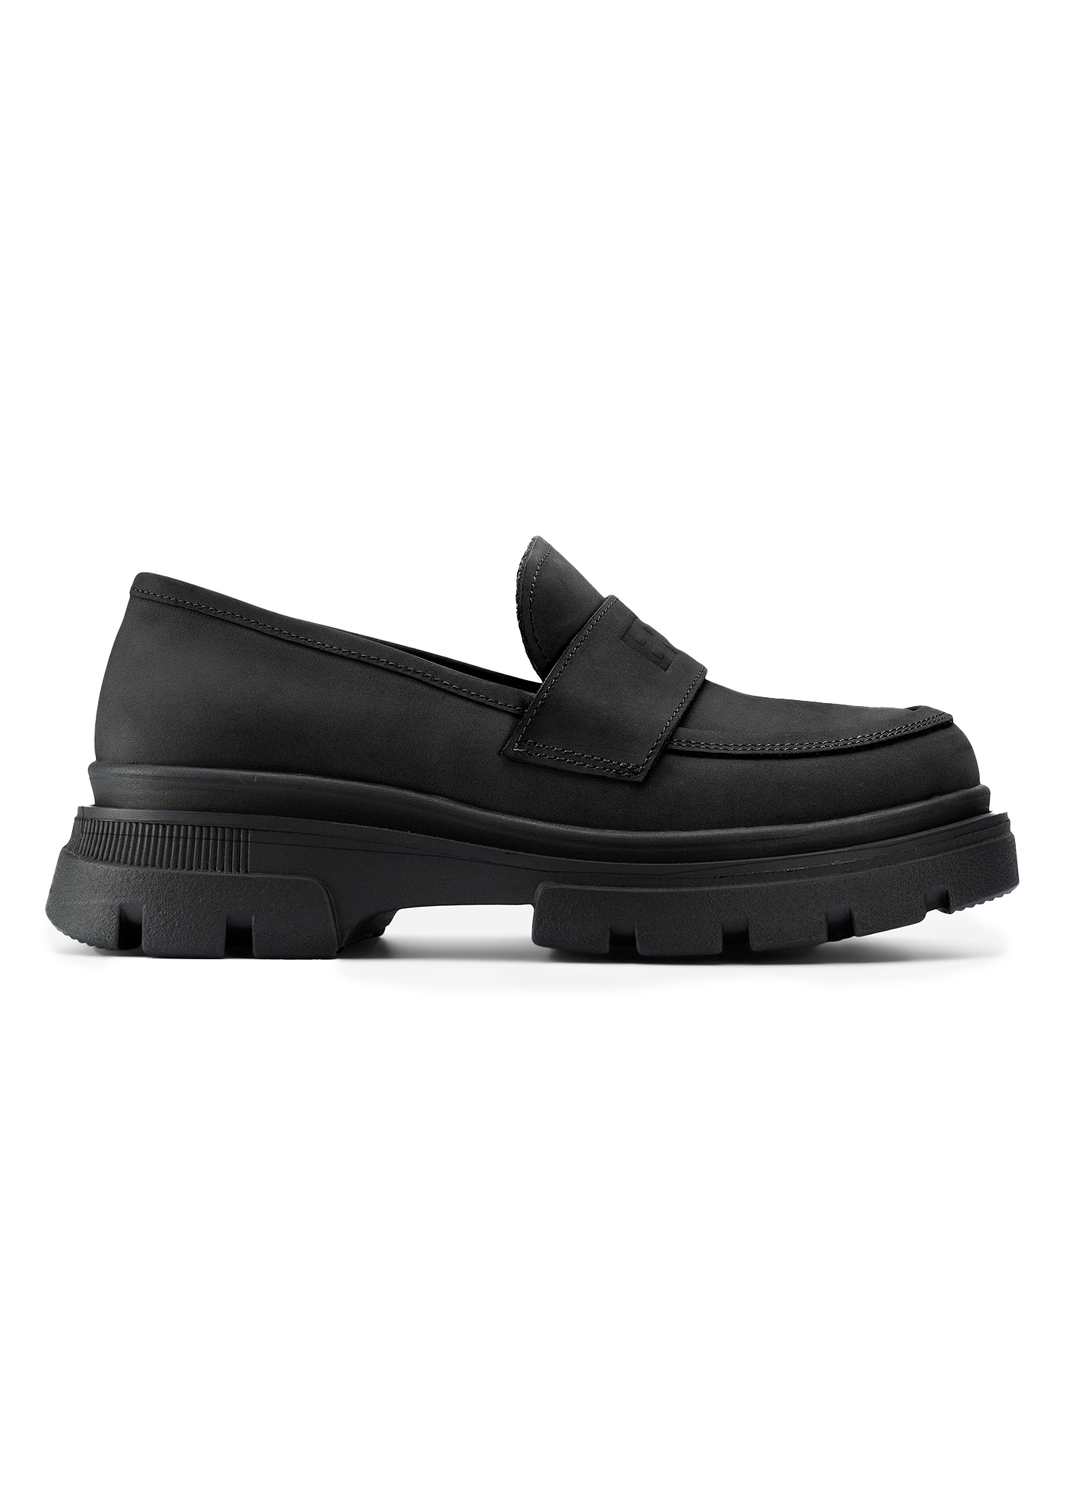 BRGN by Lunde & Gaundal Loafers Shoes 095 New Black